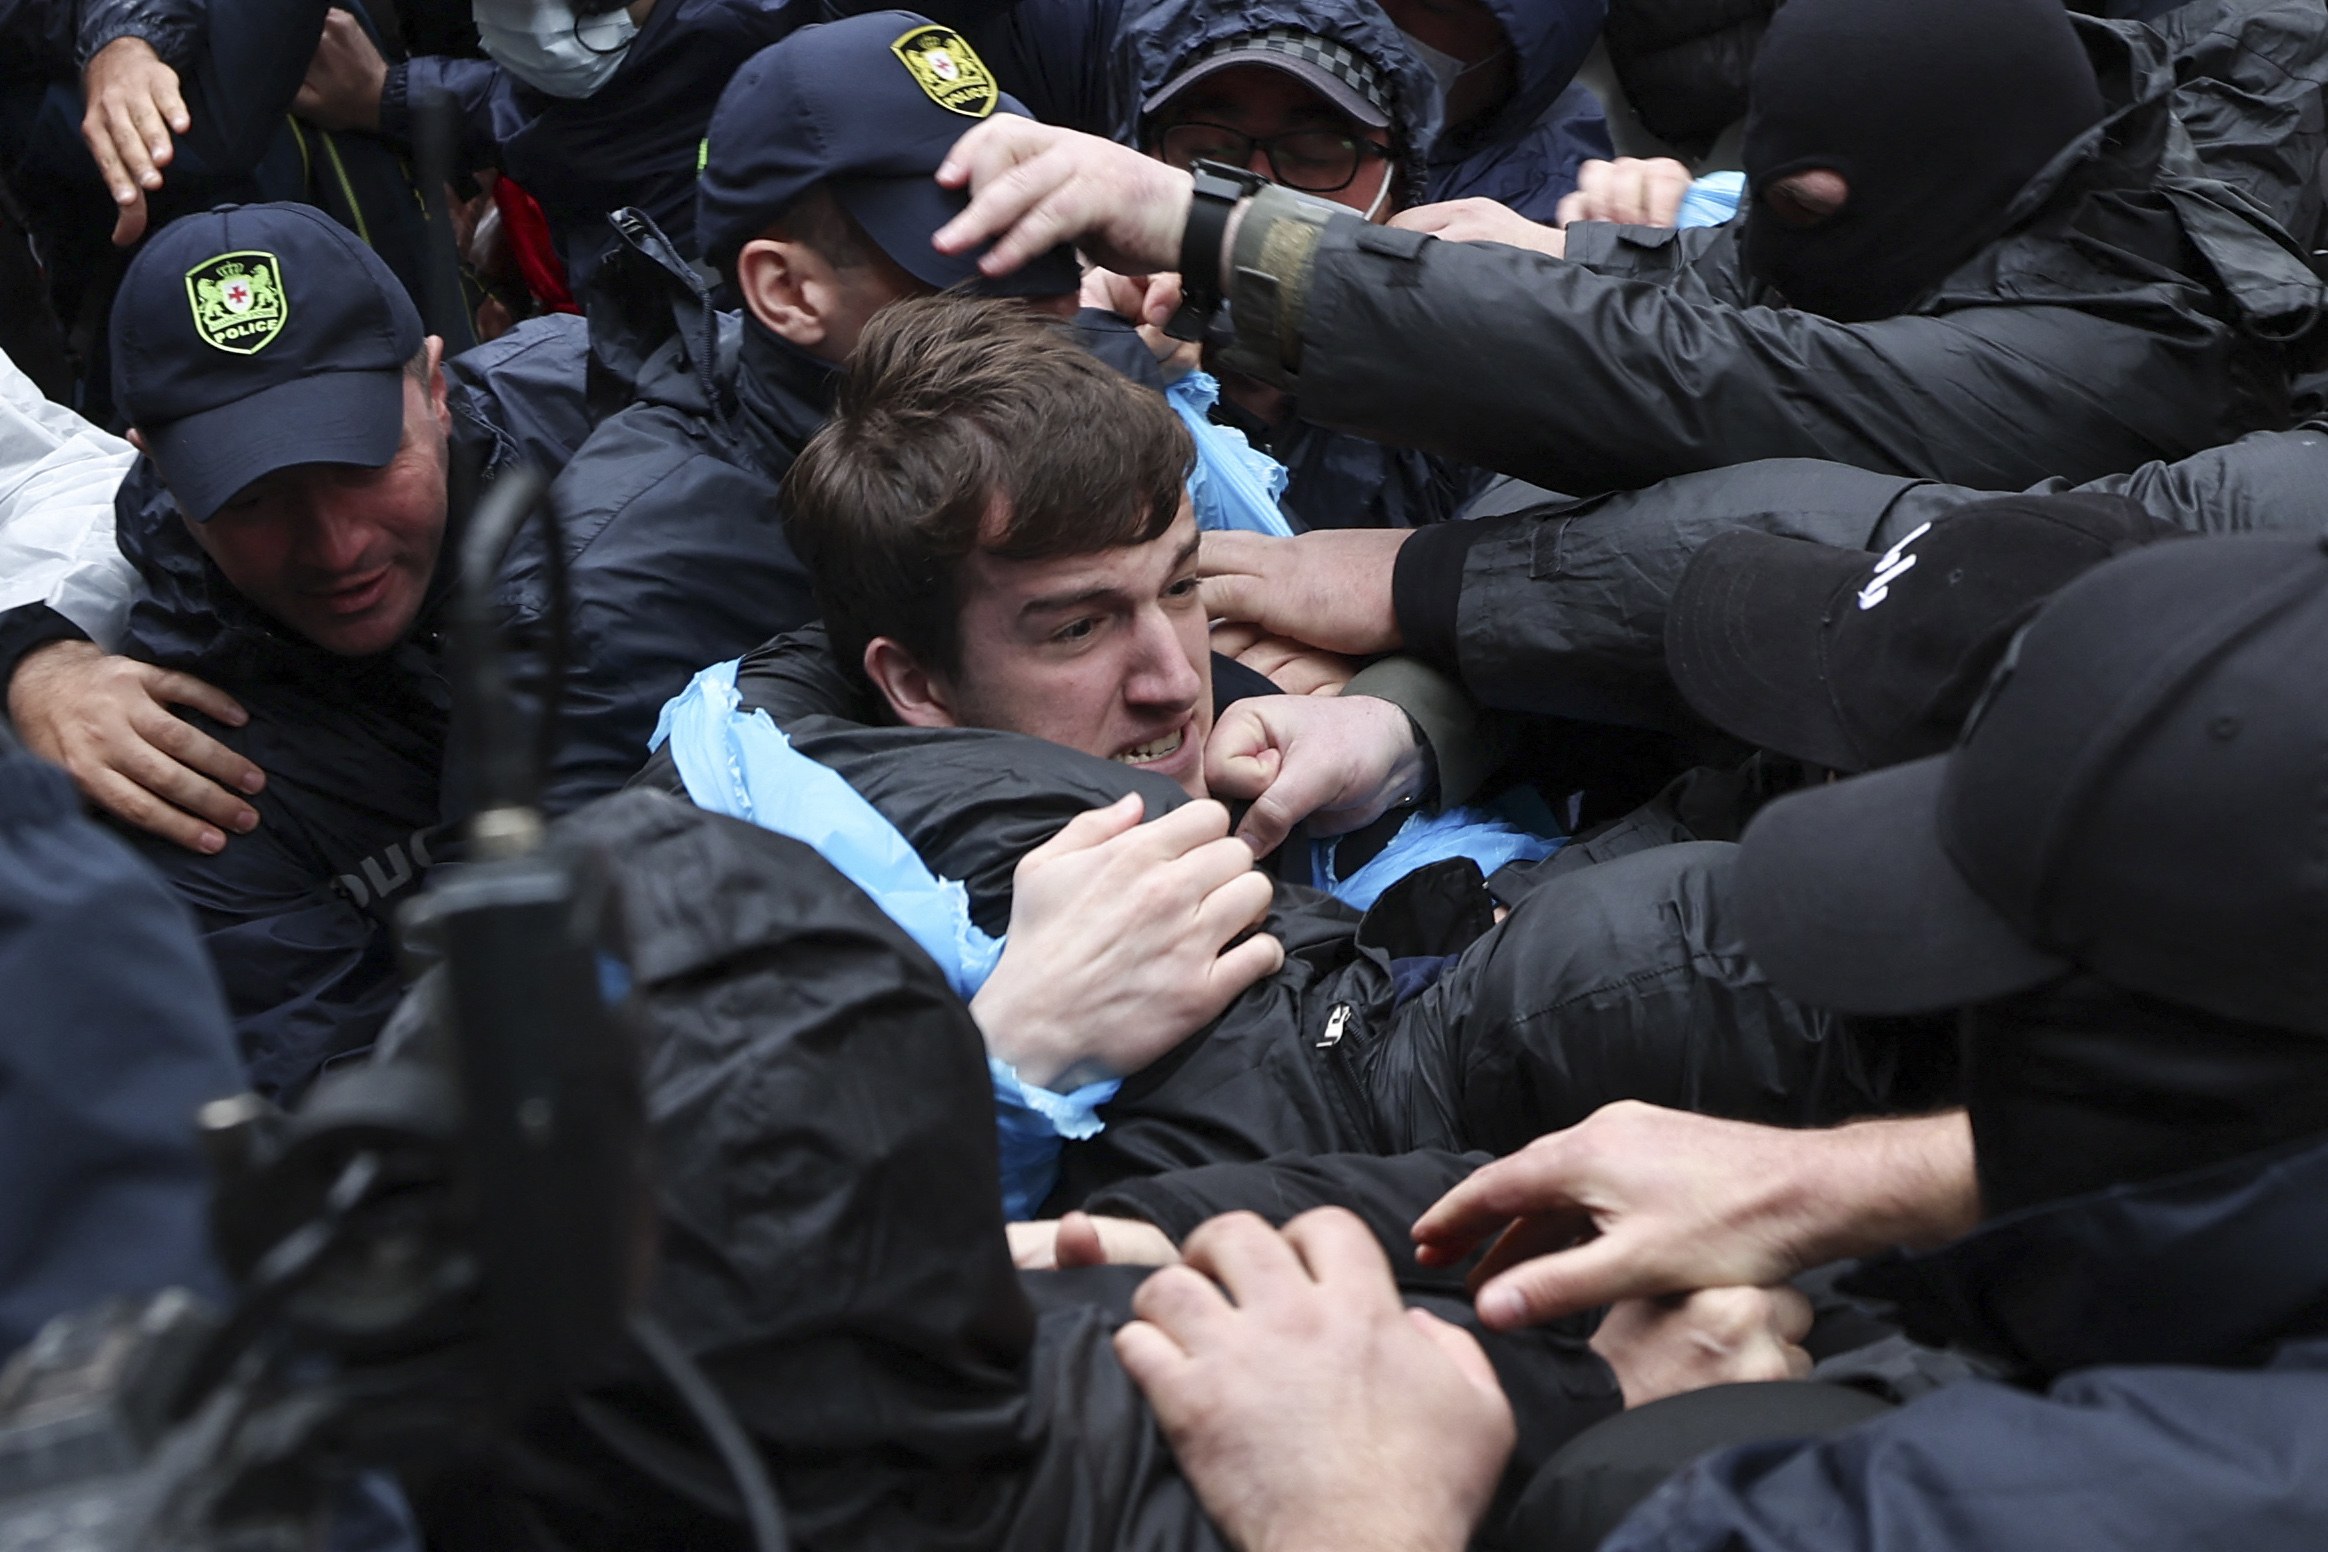 Georgian law enforcement officers detain a demonstrator in Tbilisi on May 14.